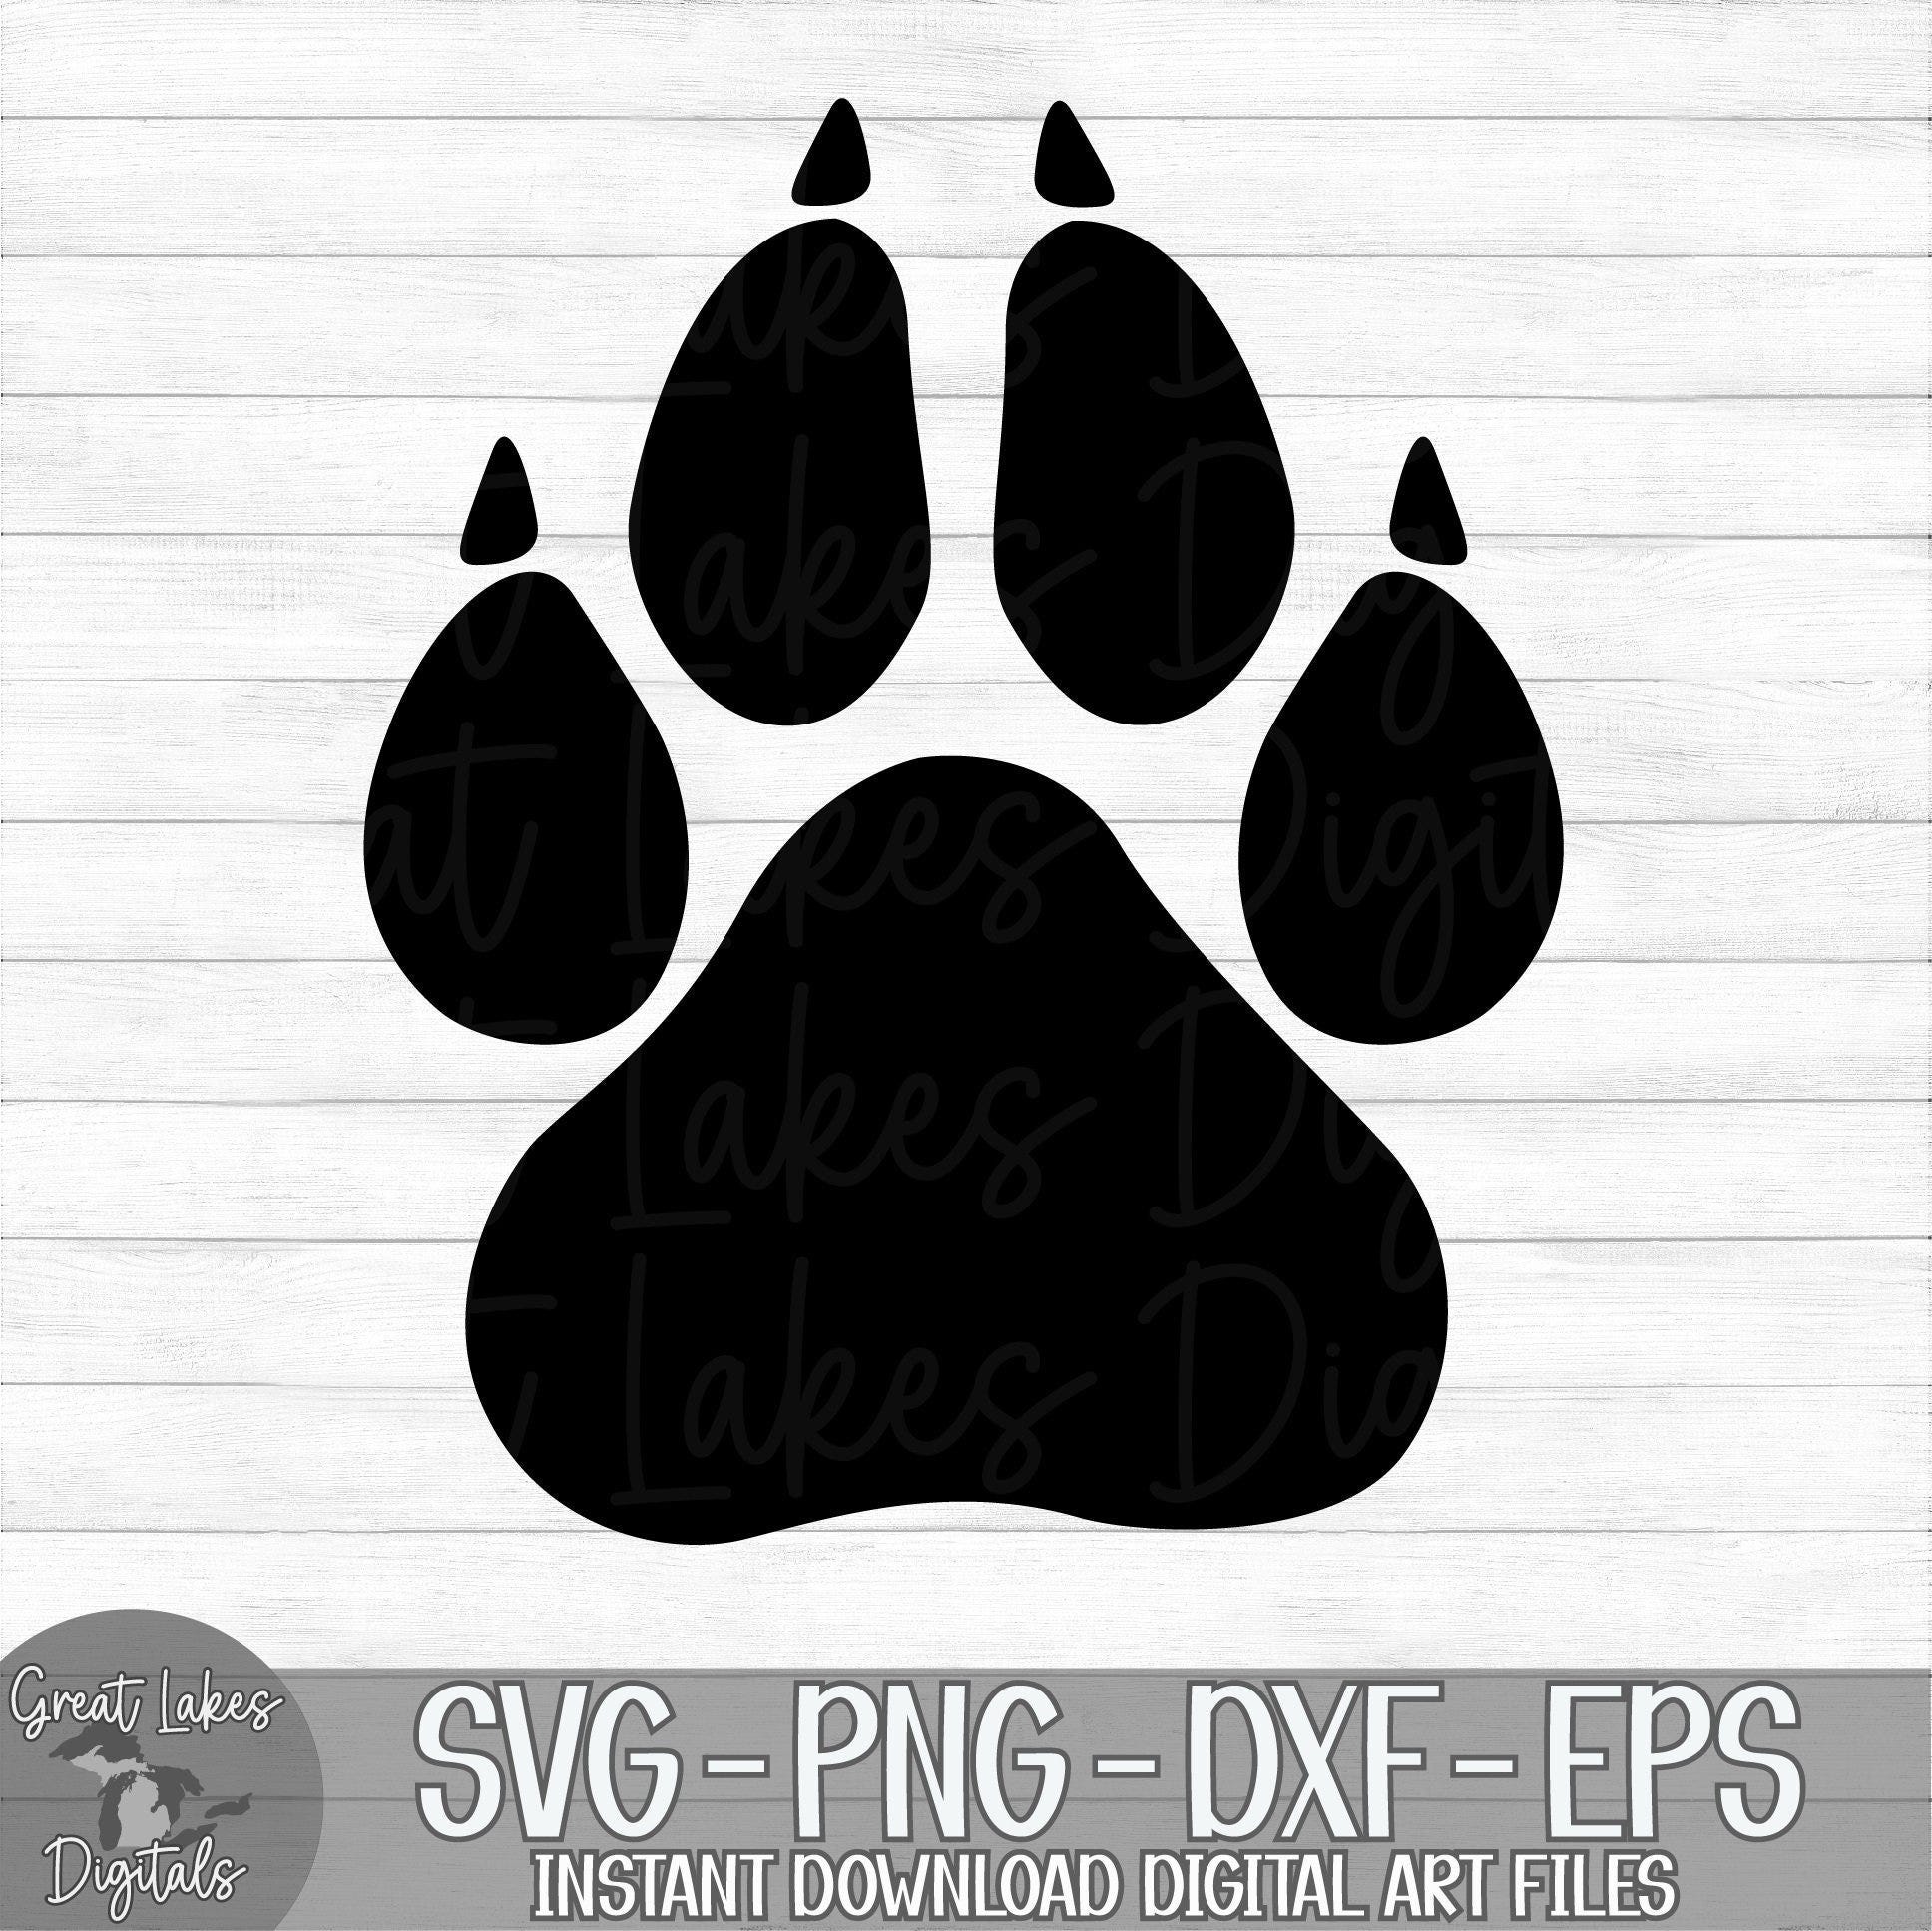 Paw Print - Instant Digital Download - svg, png, dxf, and eps files included!